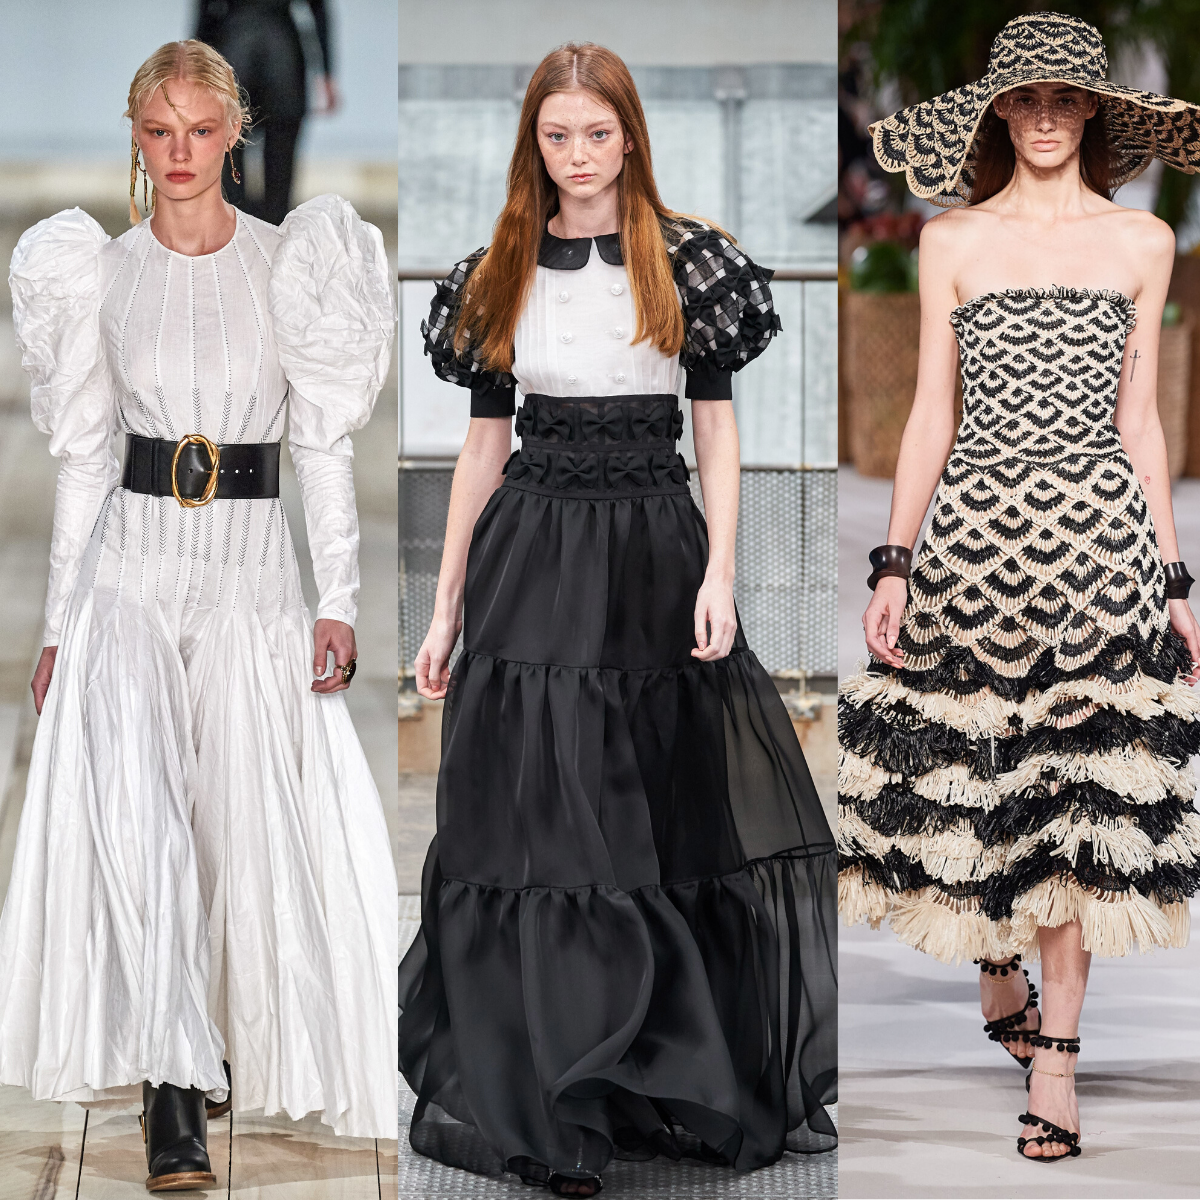 Sewing Inspiration From Spring Trends 2020: Runway inspiration